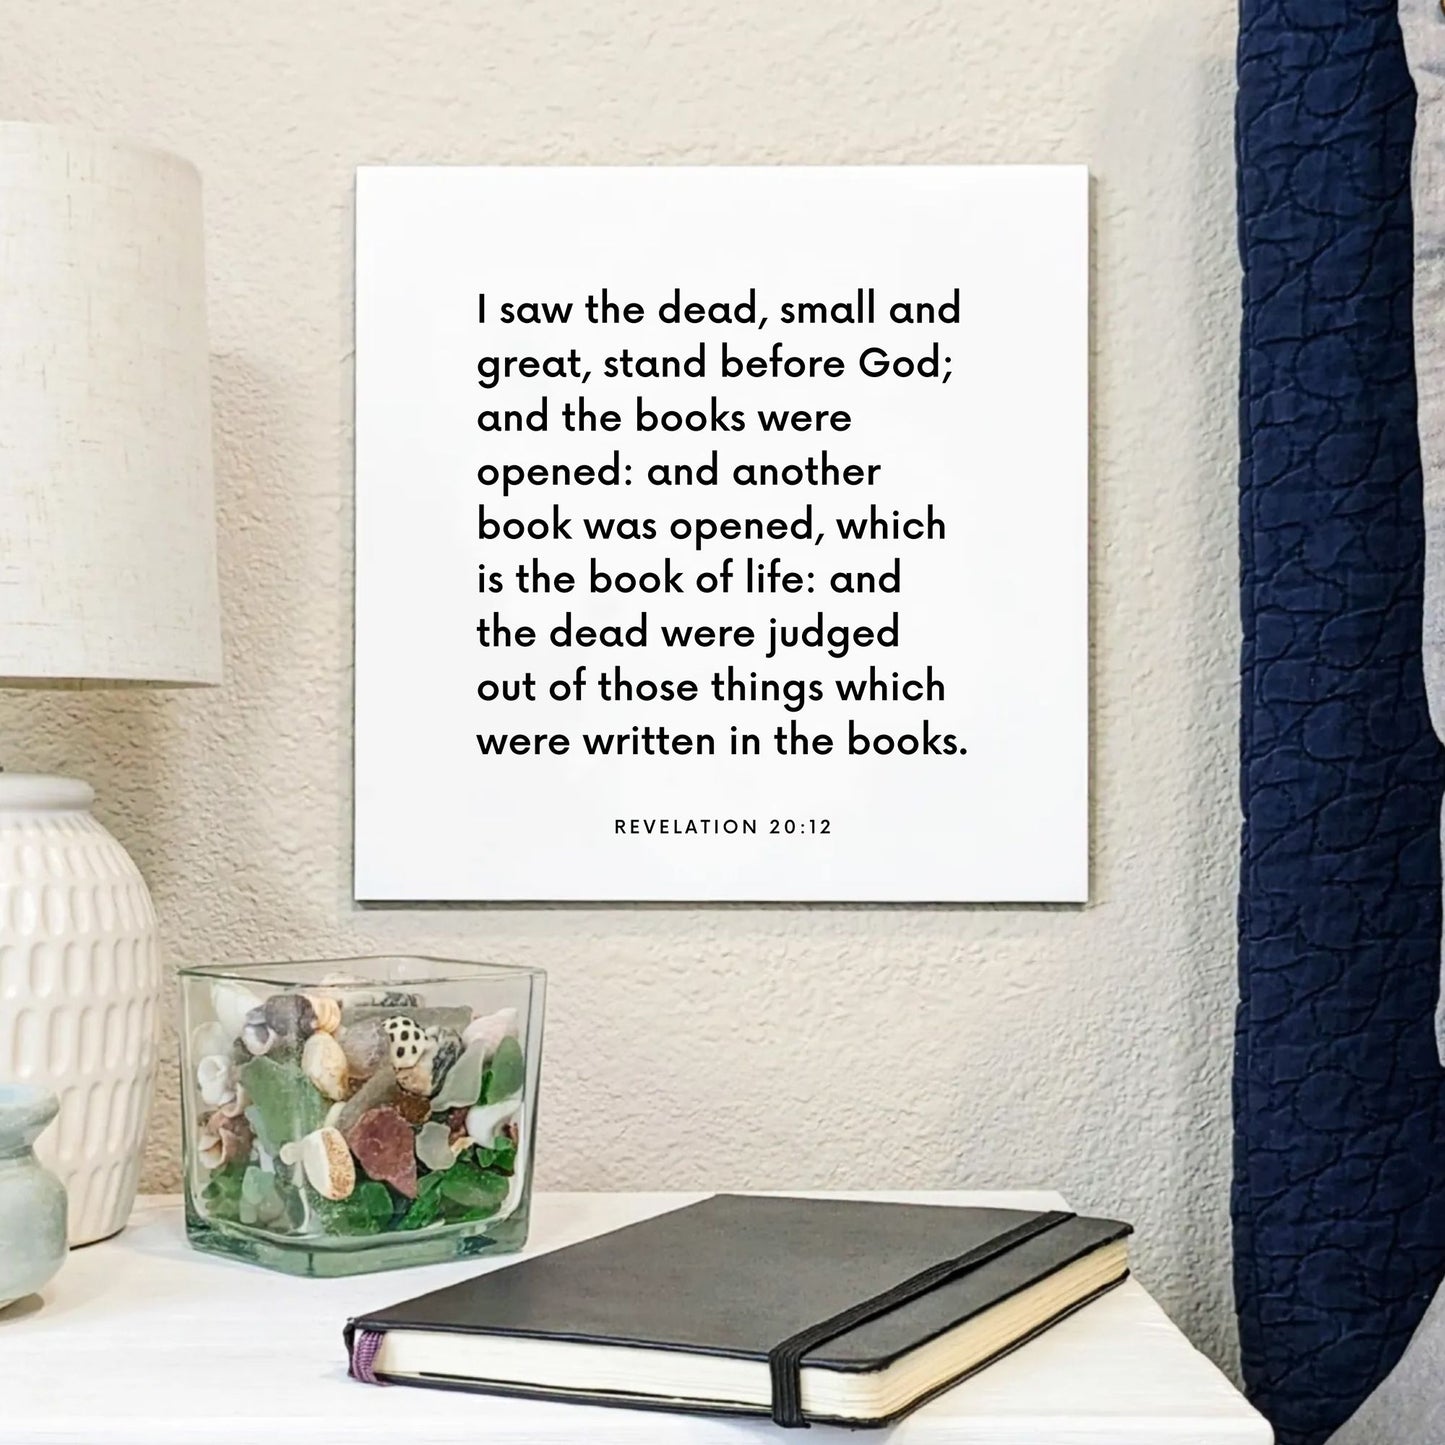 Bedside mouting of the scripture tile for Revelation 20:12 - "I saw the dead, small and great, stand before God"